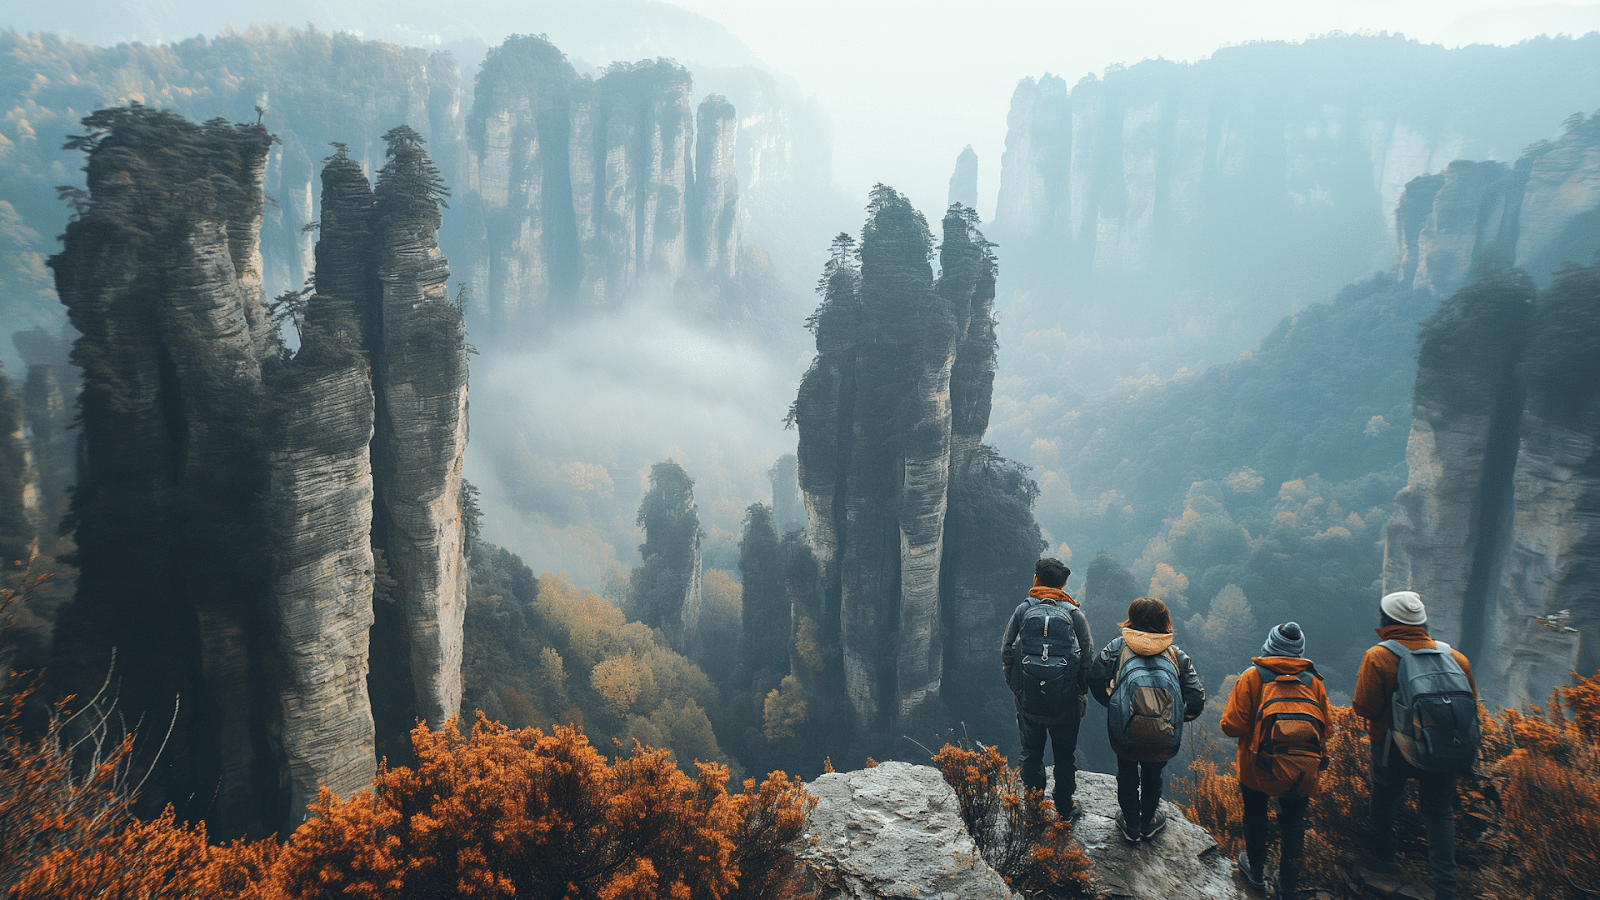 Hikers gaze at towering misty cliffs of Zhangjiajie National Forest Park in China, a top Asia travel destination for adventurers